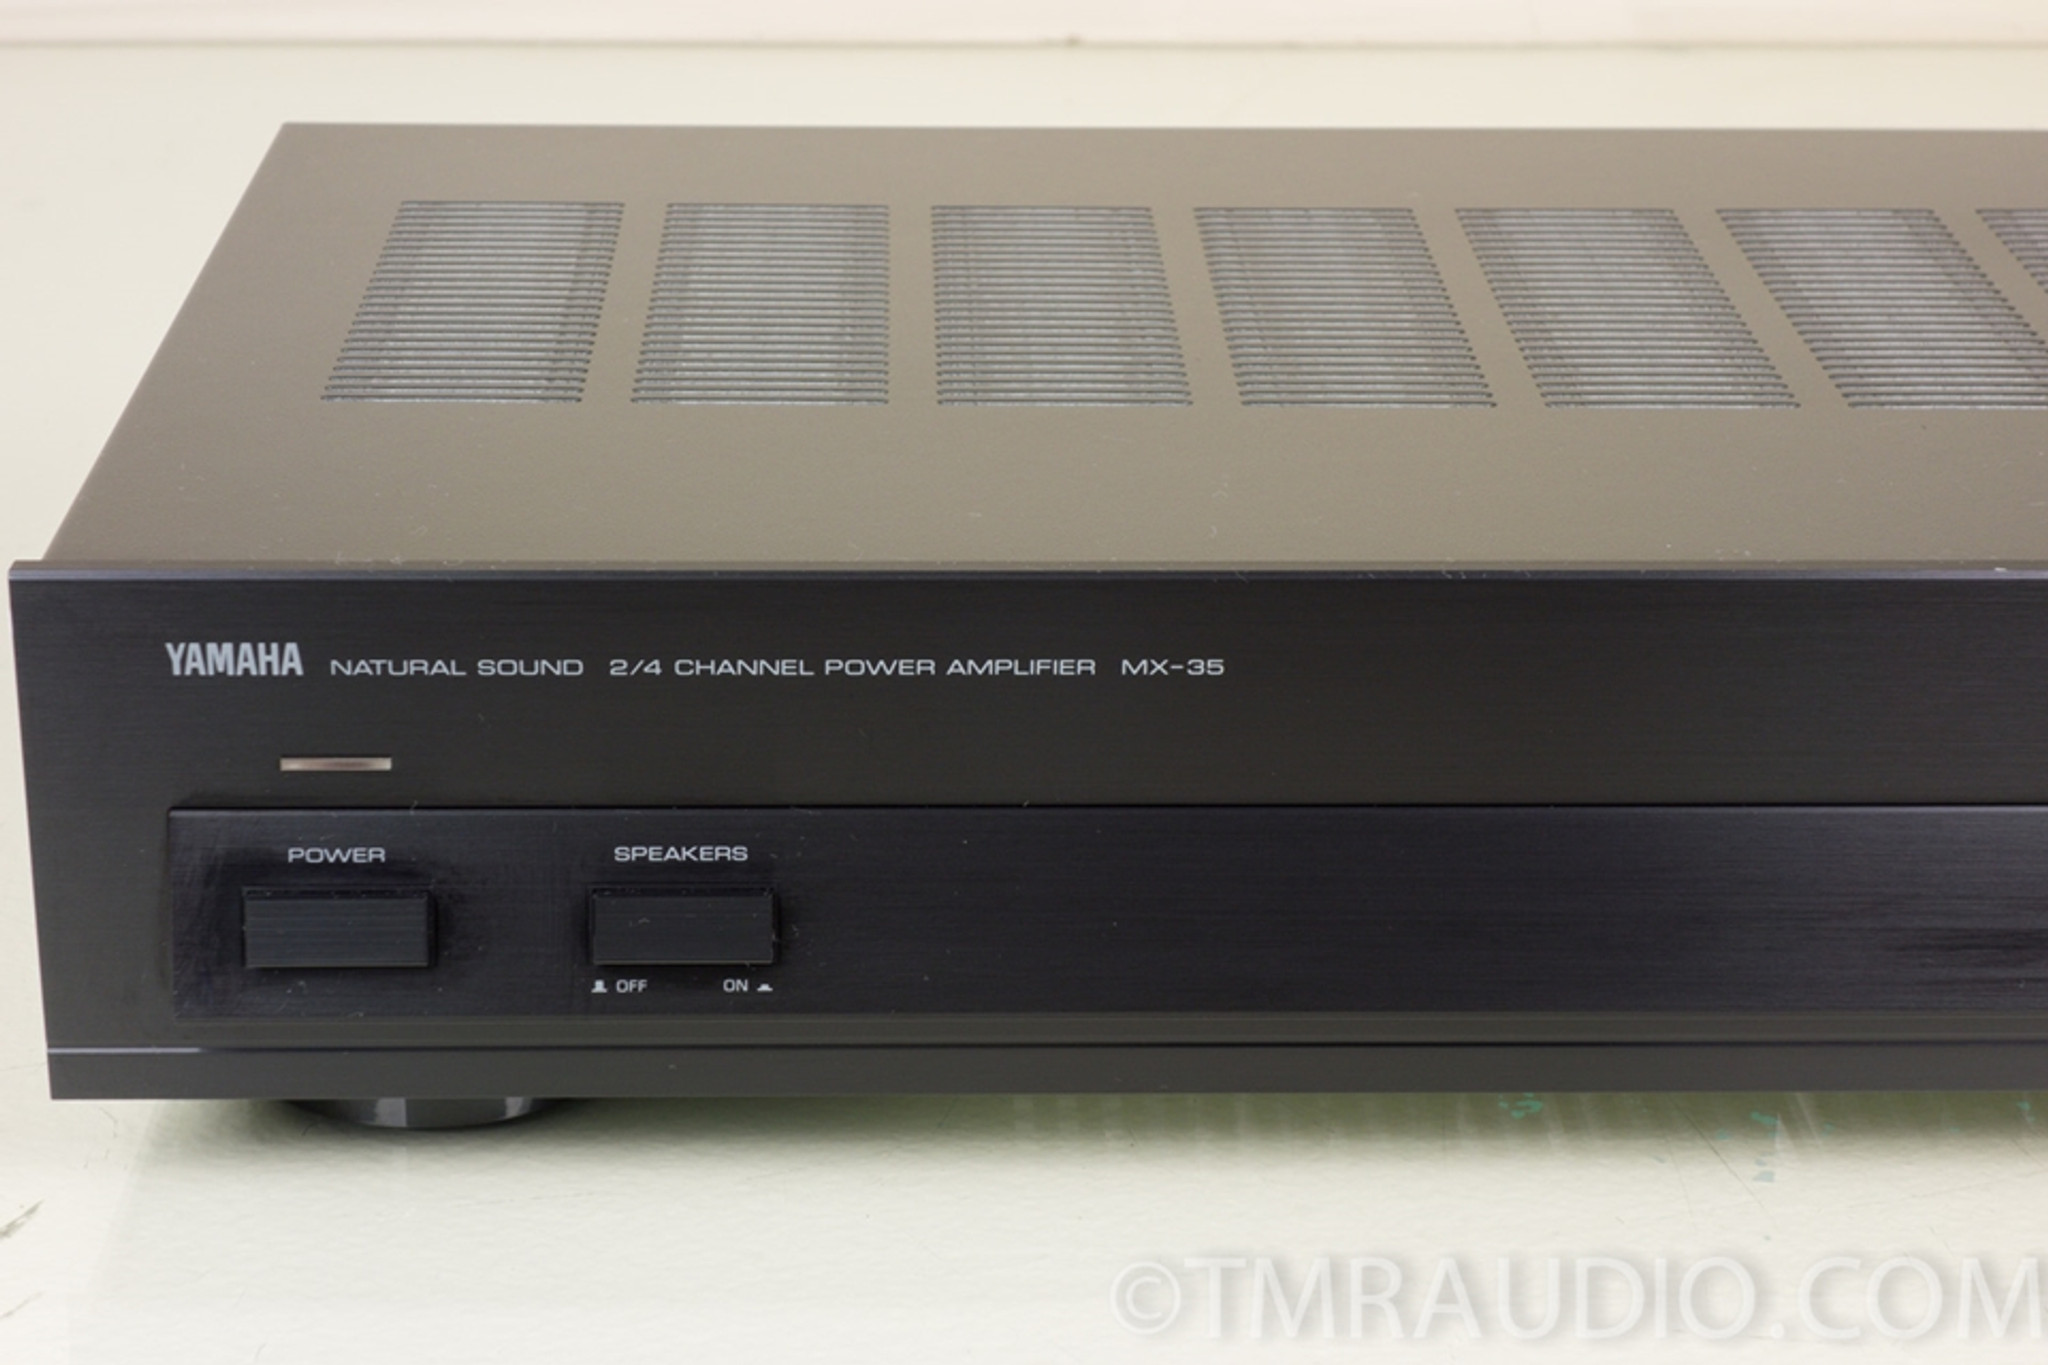 Yamaha MX-35 Natural Sound 2 / 4 channel Stereo Power Amplifier